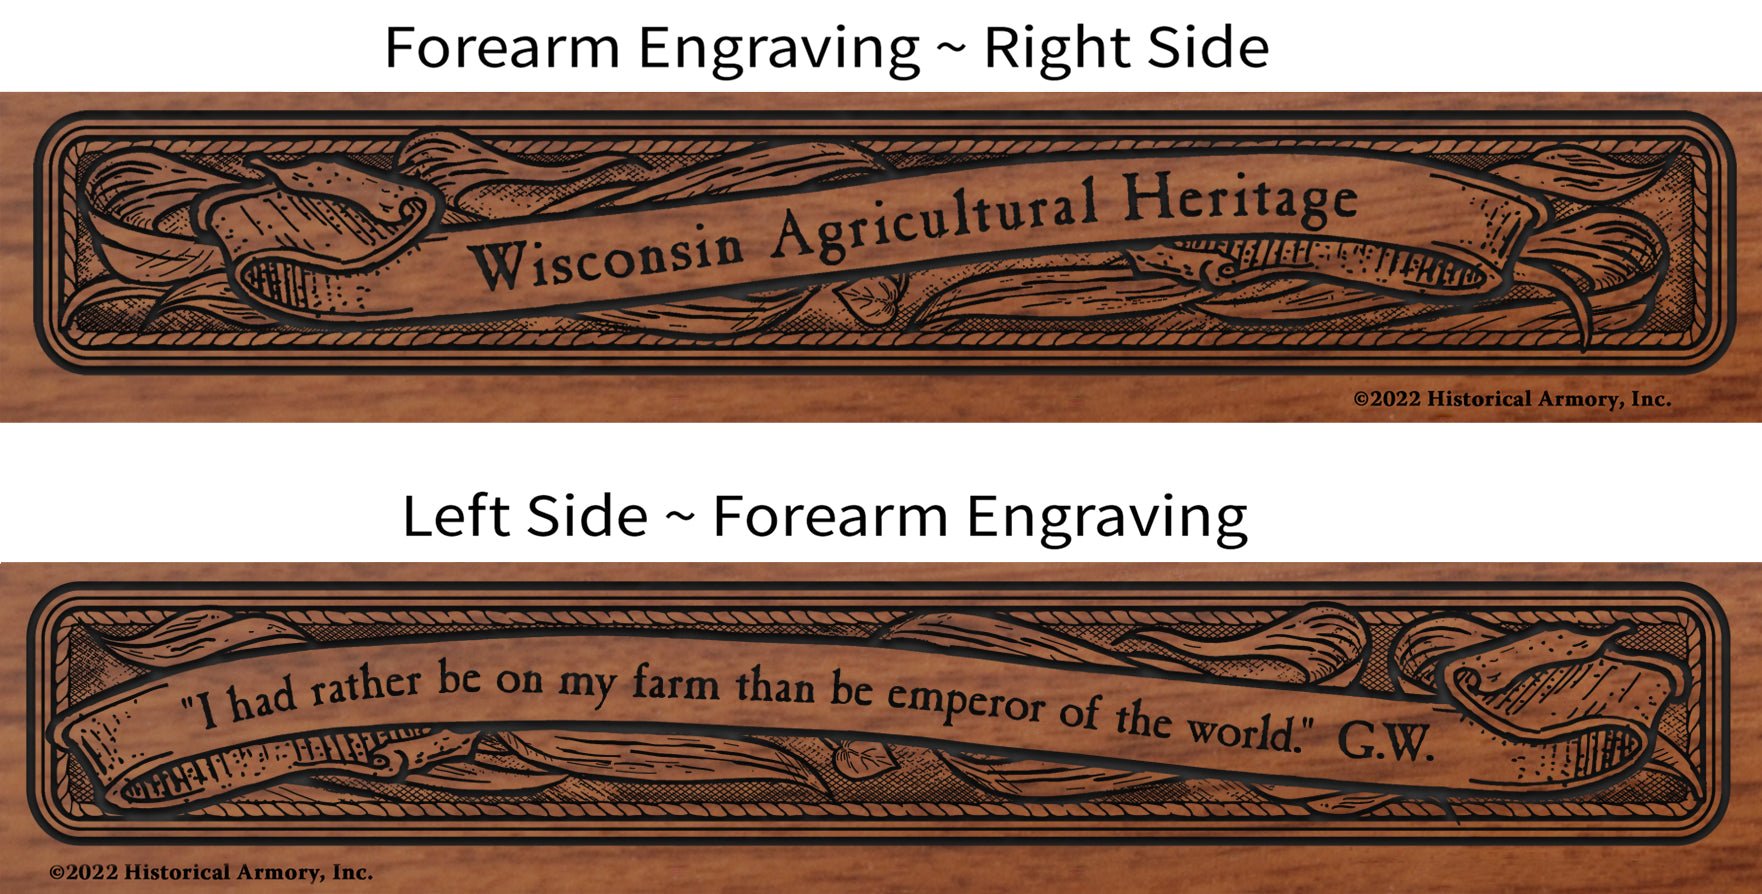 Wisconsin Agricultural Heritage Engraved Rifle Forearm